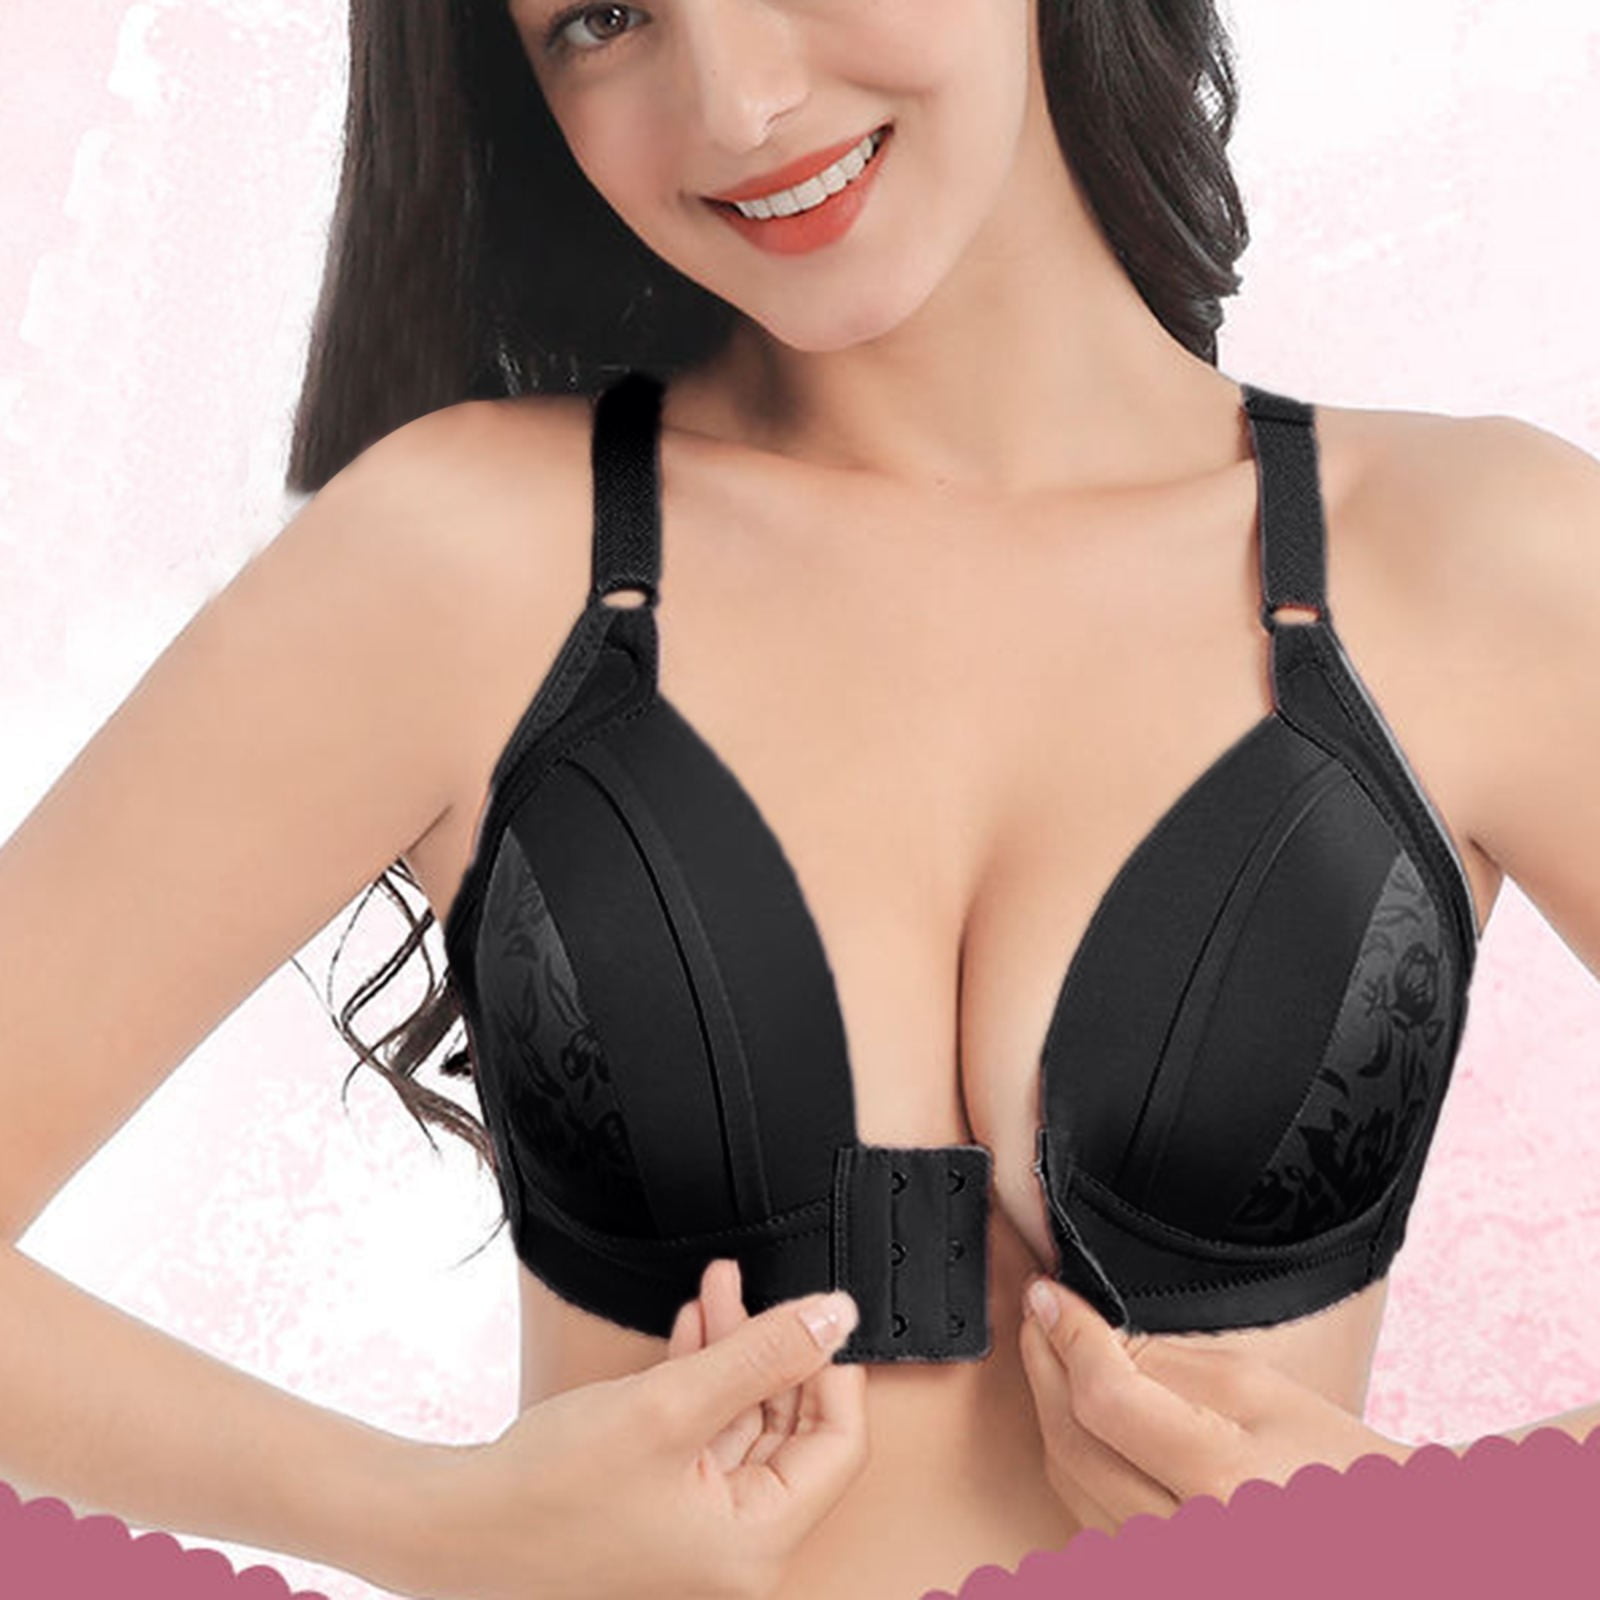 GATXVG Plus Size Bras for Women No Underwire Push Up Hollow Out